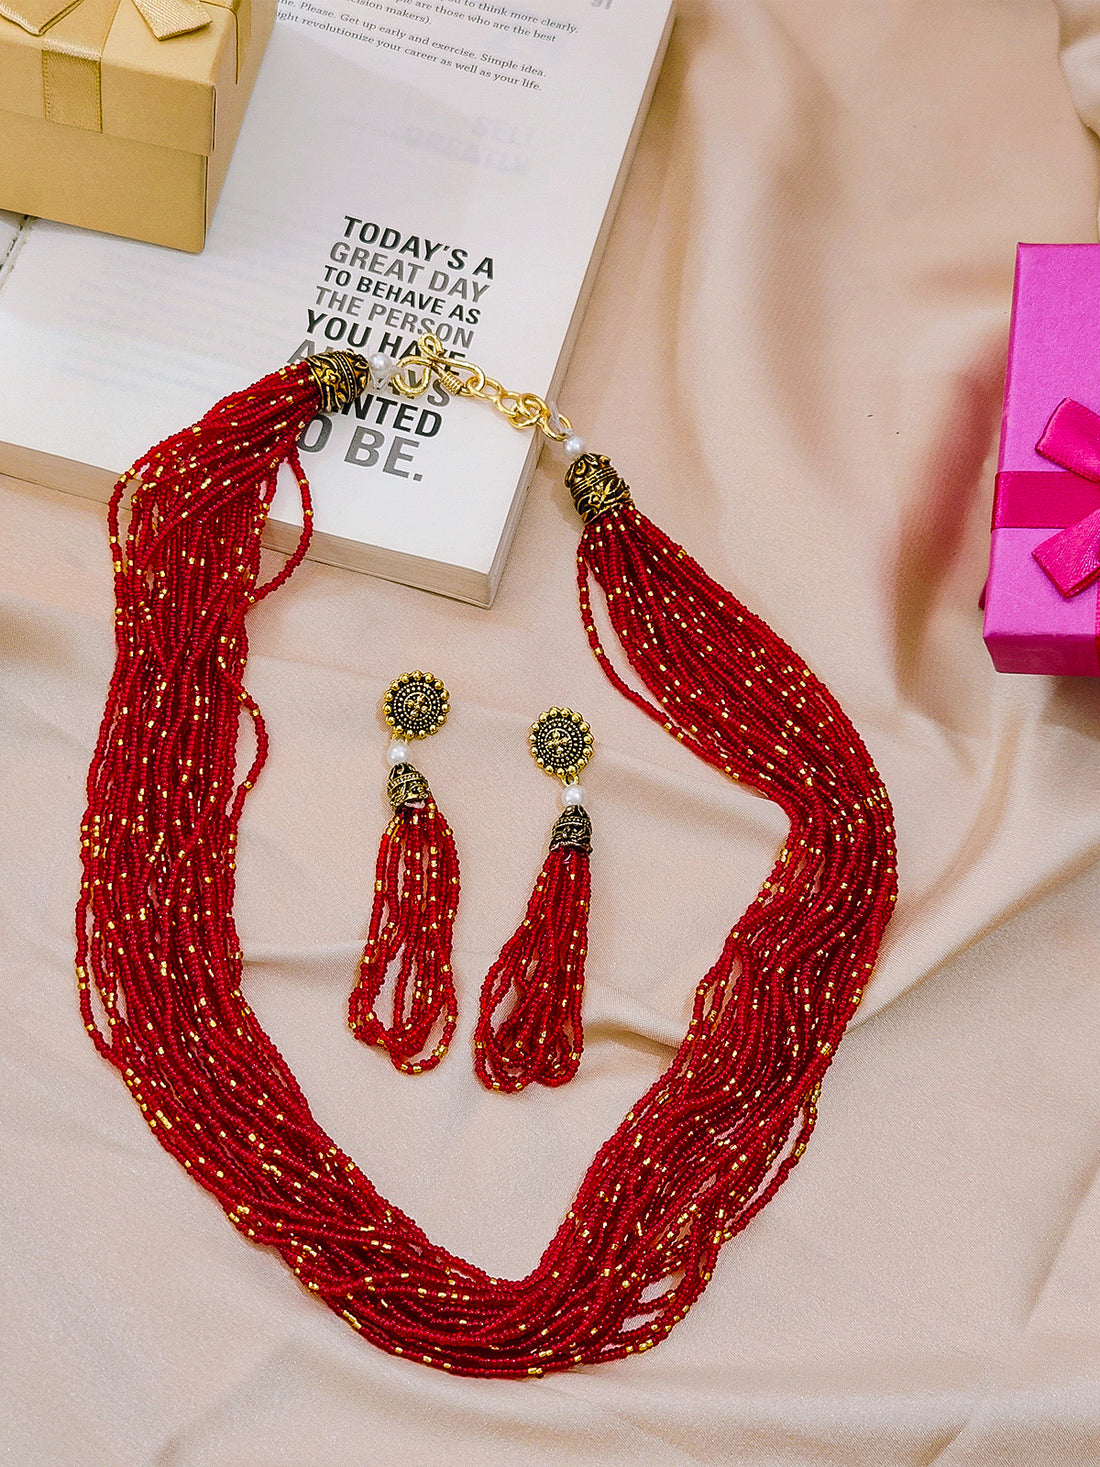 Moti Jhalar Necklace Set | Maroon-colour Beads Necklace & Earrings for Parties & Office Going Women from House of Mrigaya by Nandini - Maroon - Mrigaya India